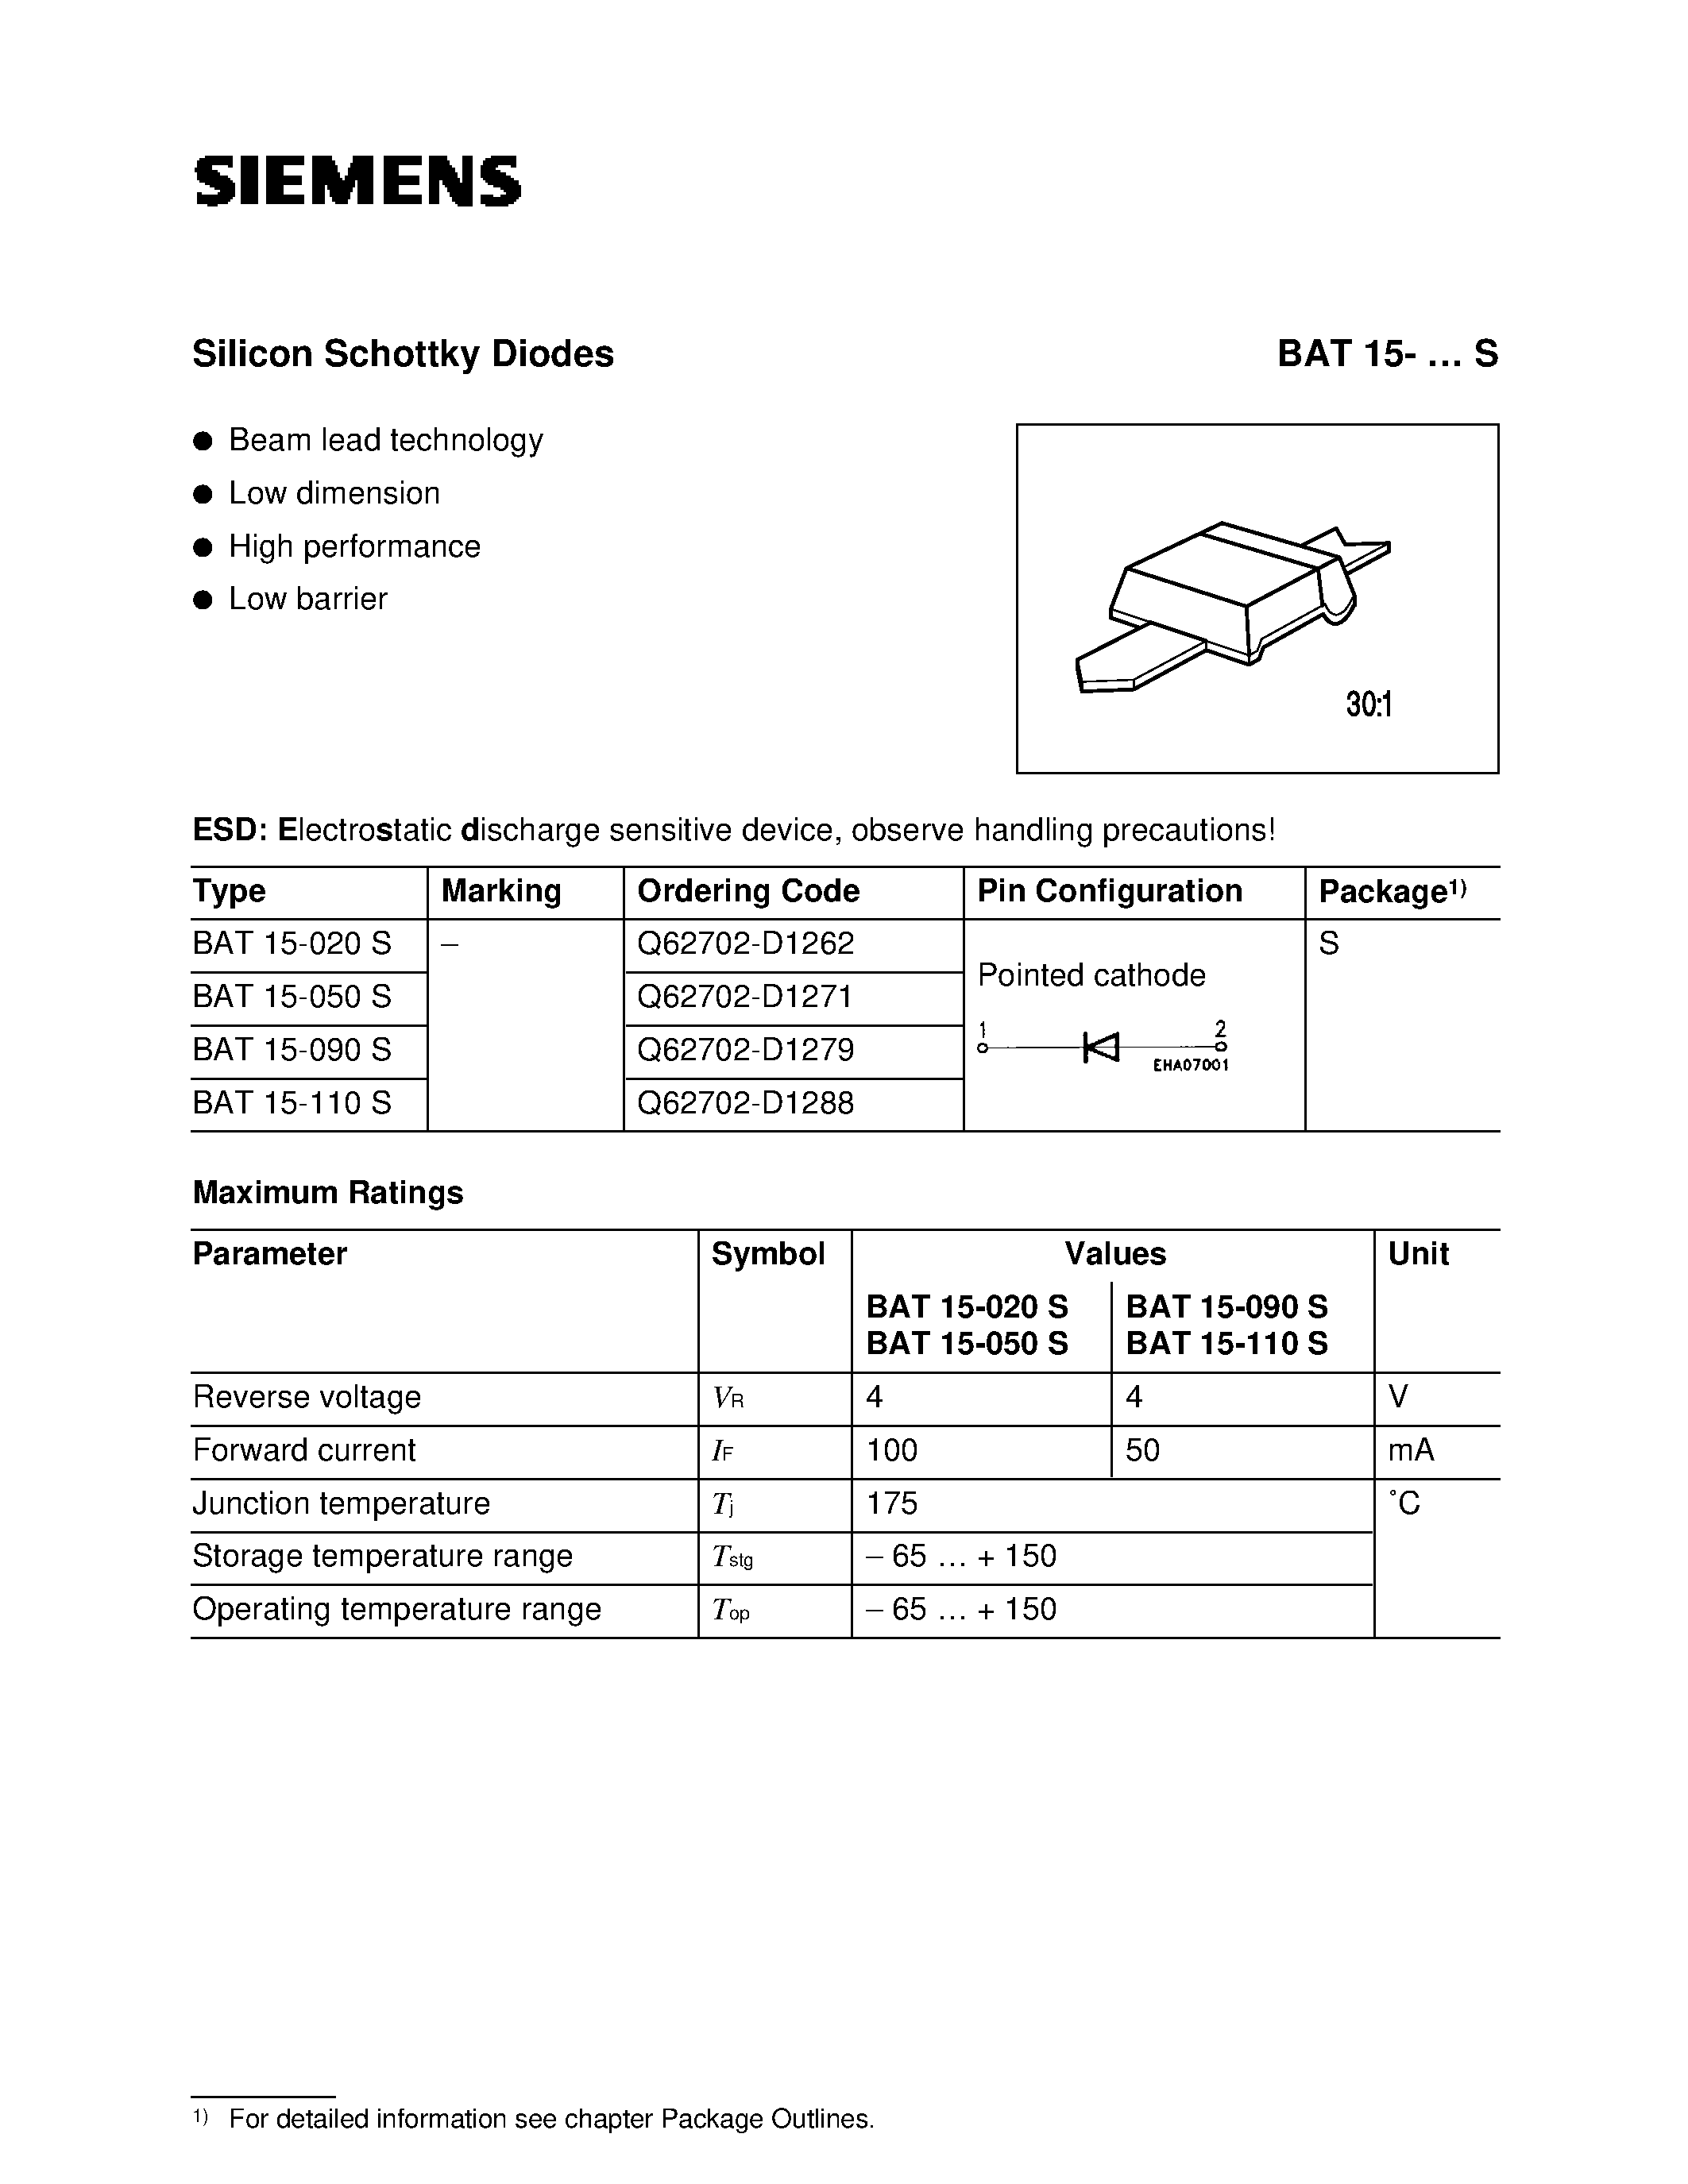 Datasheet BAT15-S - Silicon Schottky Diodes (Beam lead technology Low dimension High performance Low barrier) page 1